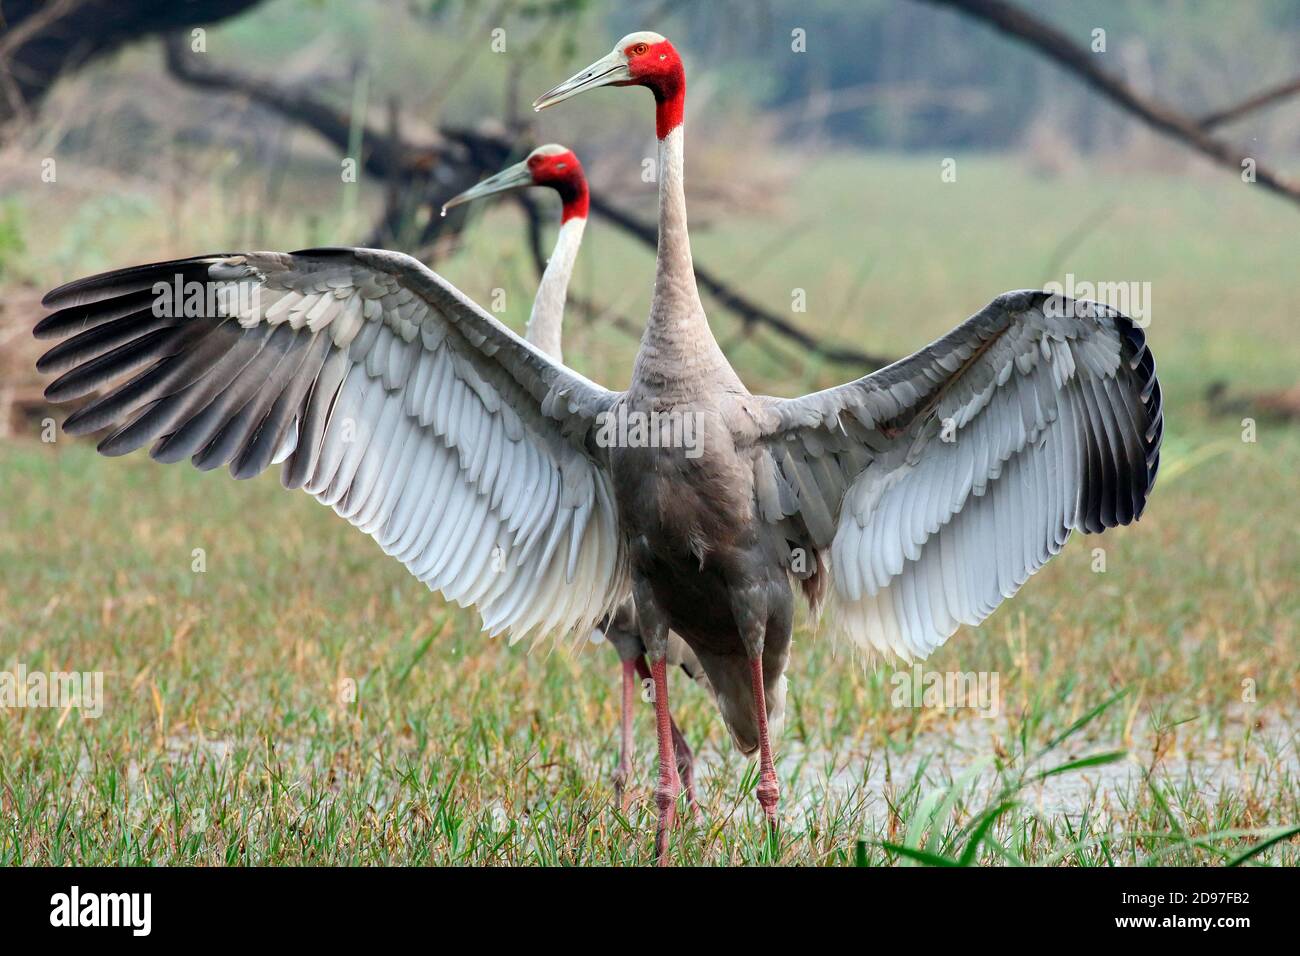 Sarus crane (Grus antigone) adult couple in a marsh parading with open wings, Northwest India Stock Photo